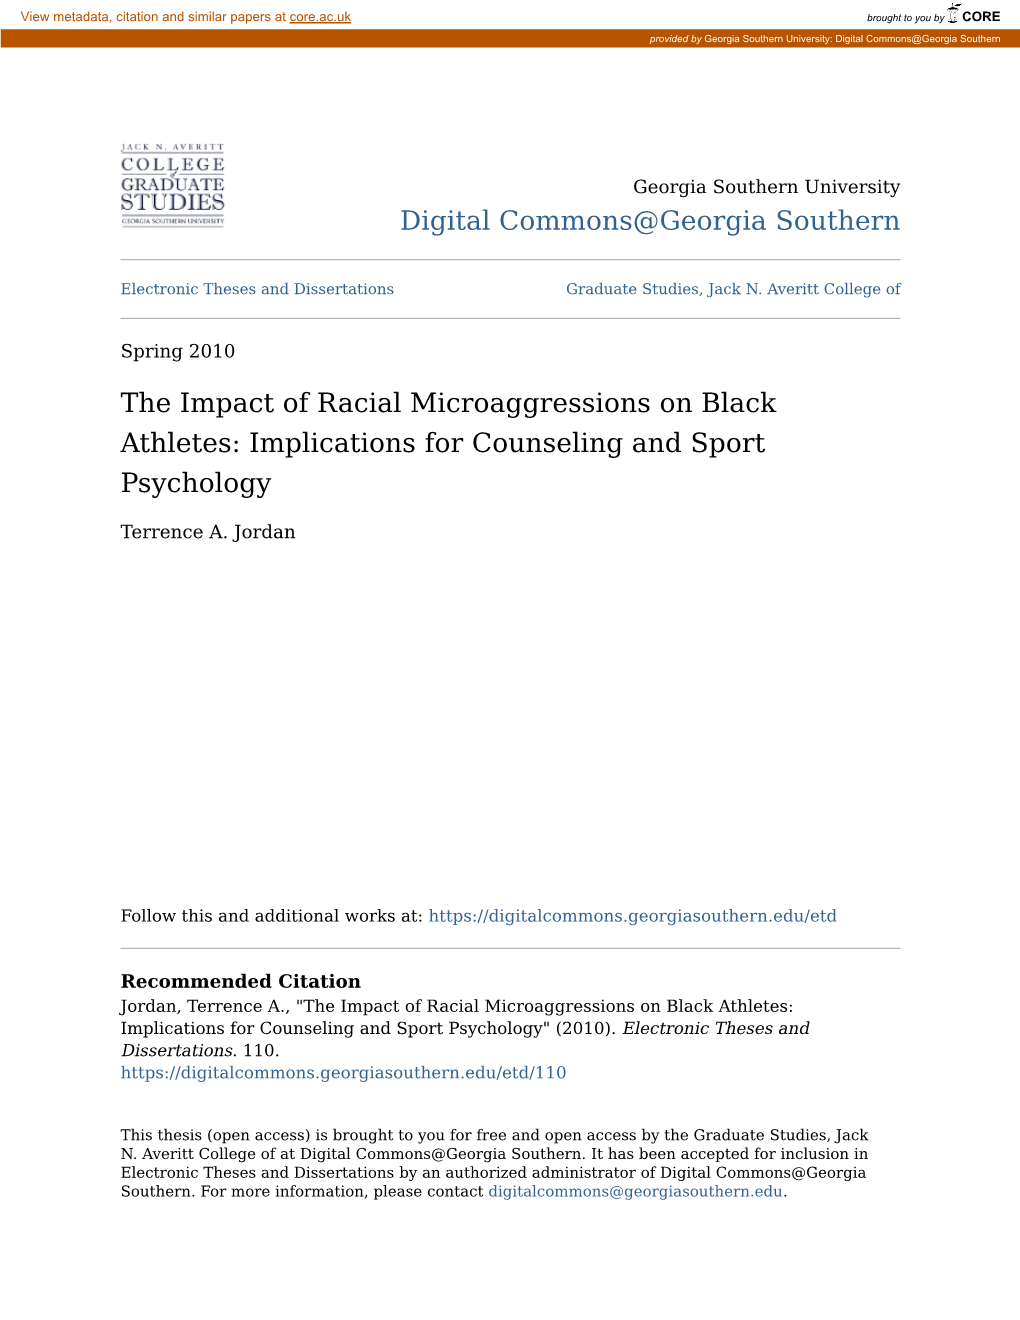 The Impact of Racial Microaggressions on Black Athletes: Implications for Counseling and Sport Psychology